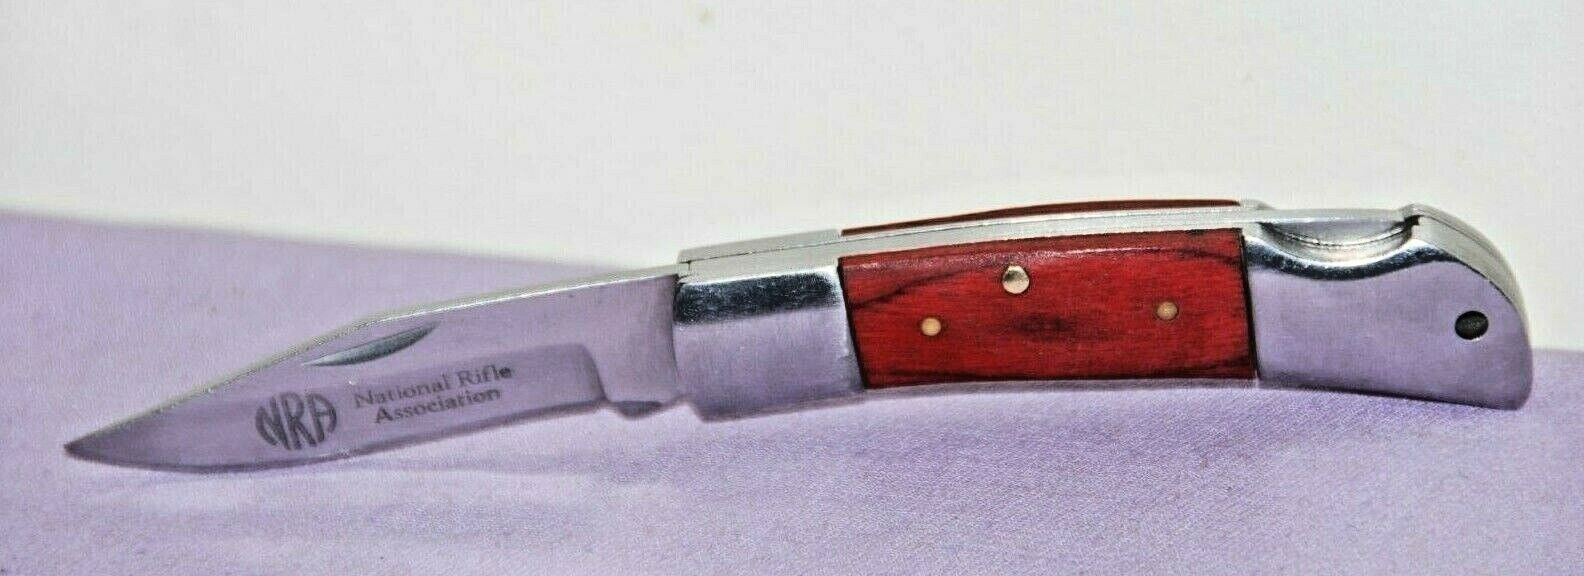 NRA 440 Stainless Folding Pocket Knife W/Wood Handle -- Great Condition